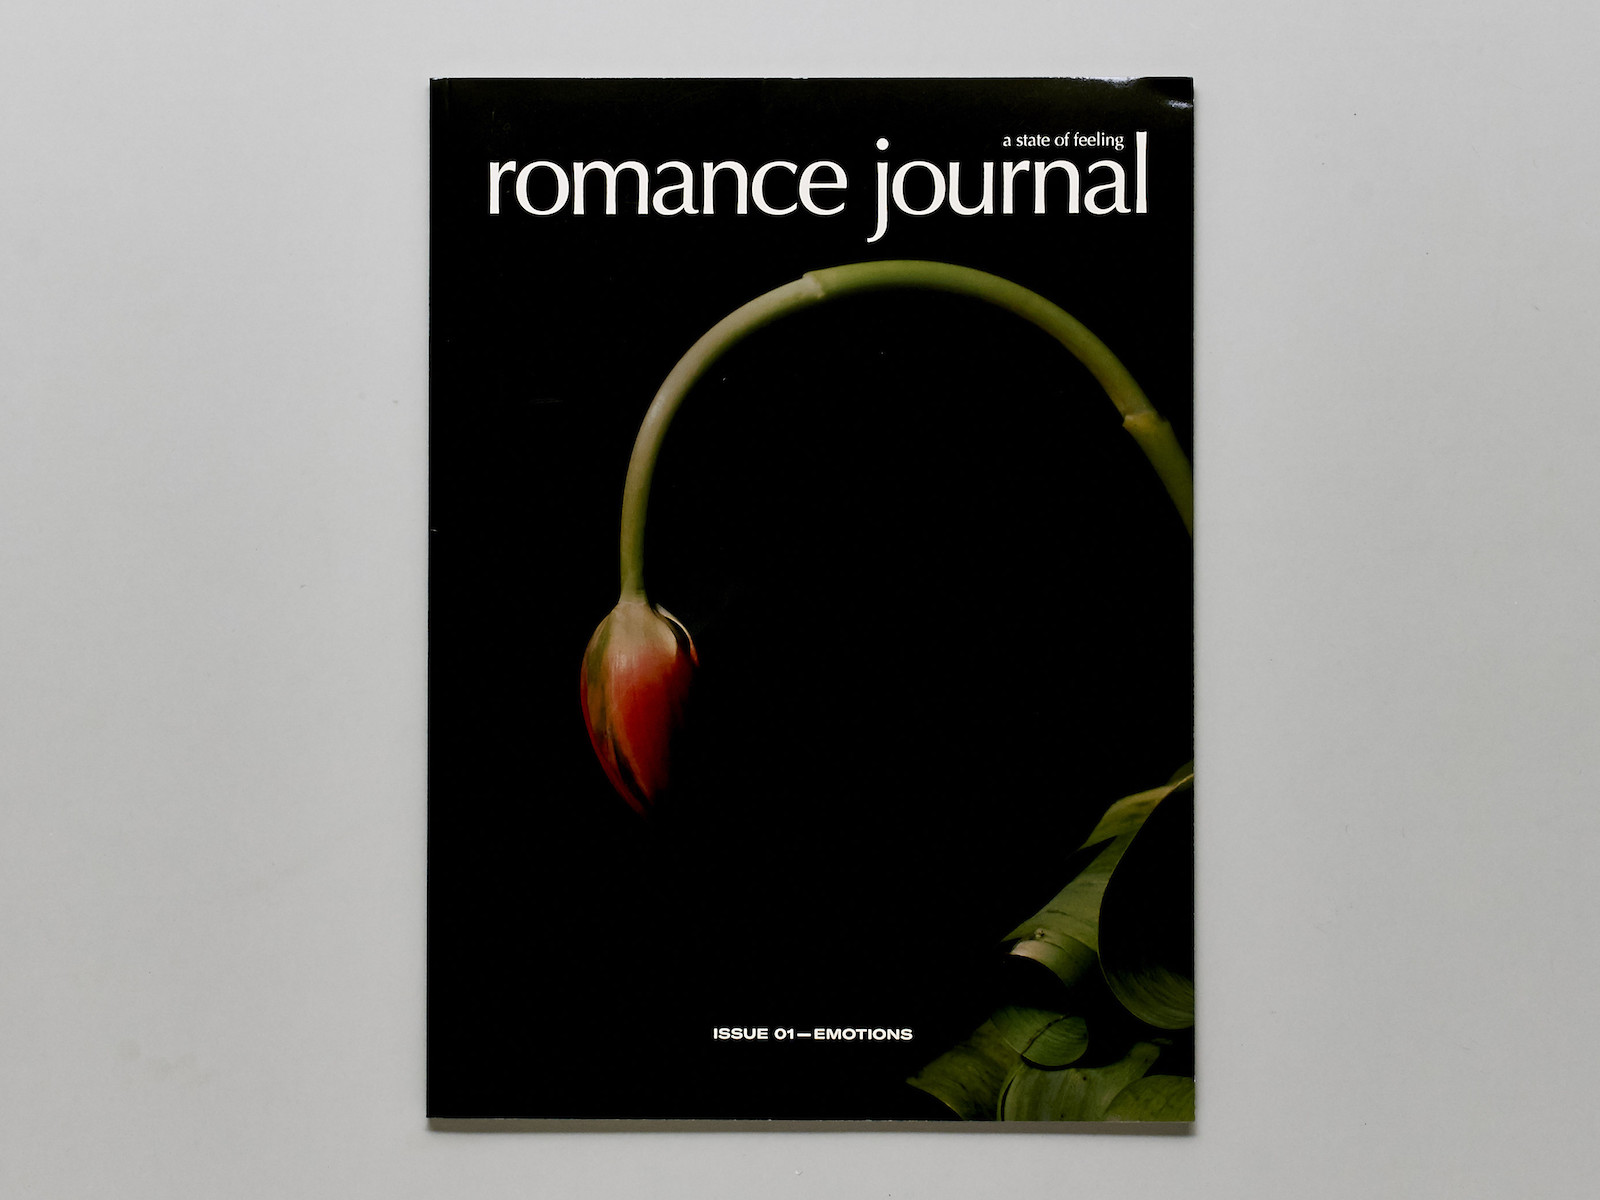 romance journa dedicated to female emotions featured